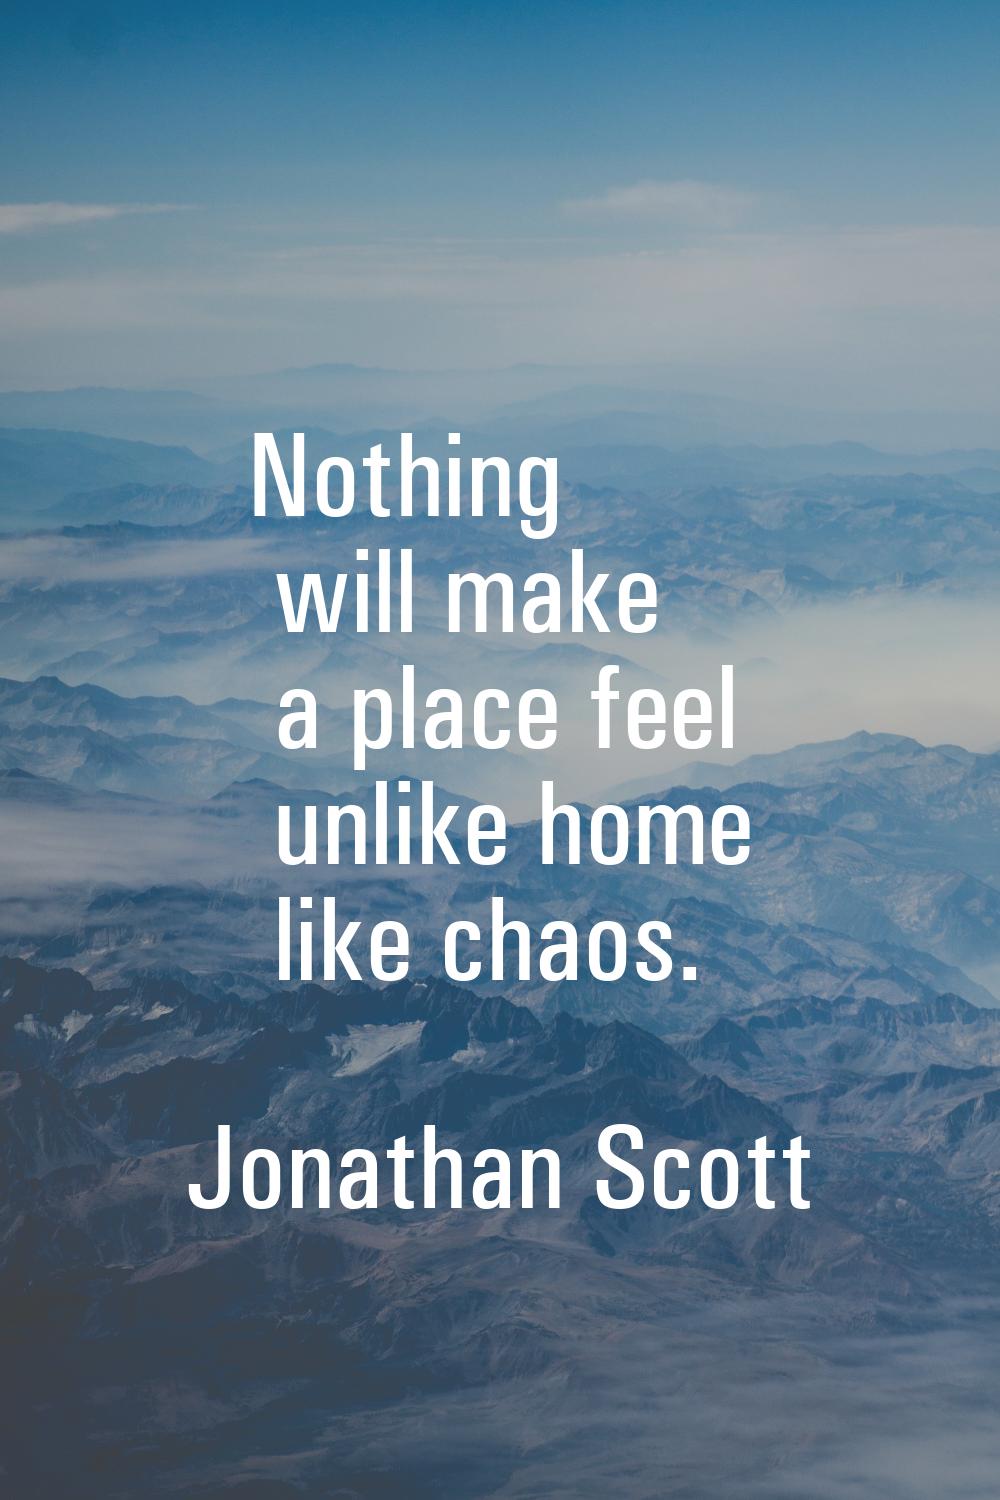 Nothing will make a place feel unlike home like chaos.